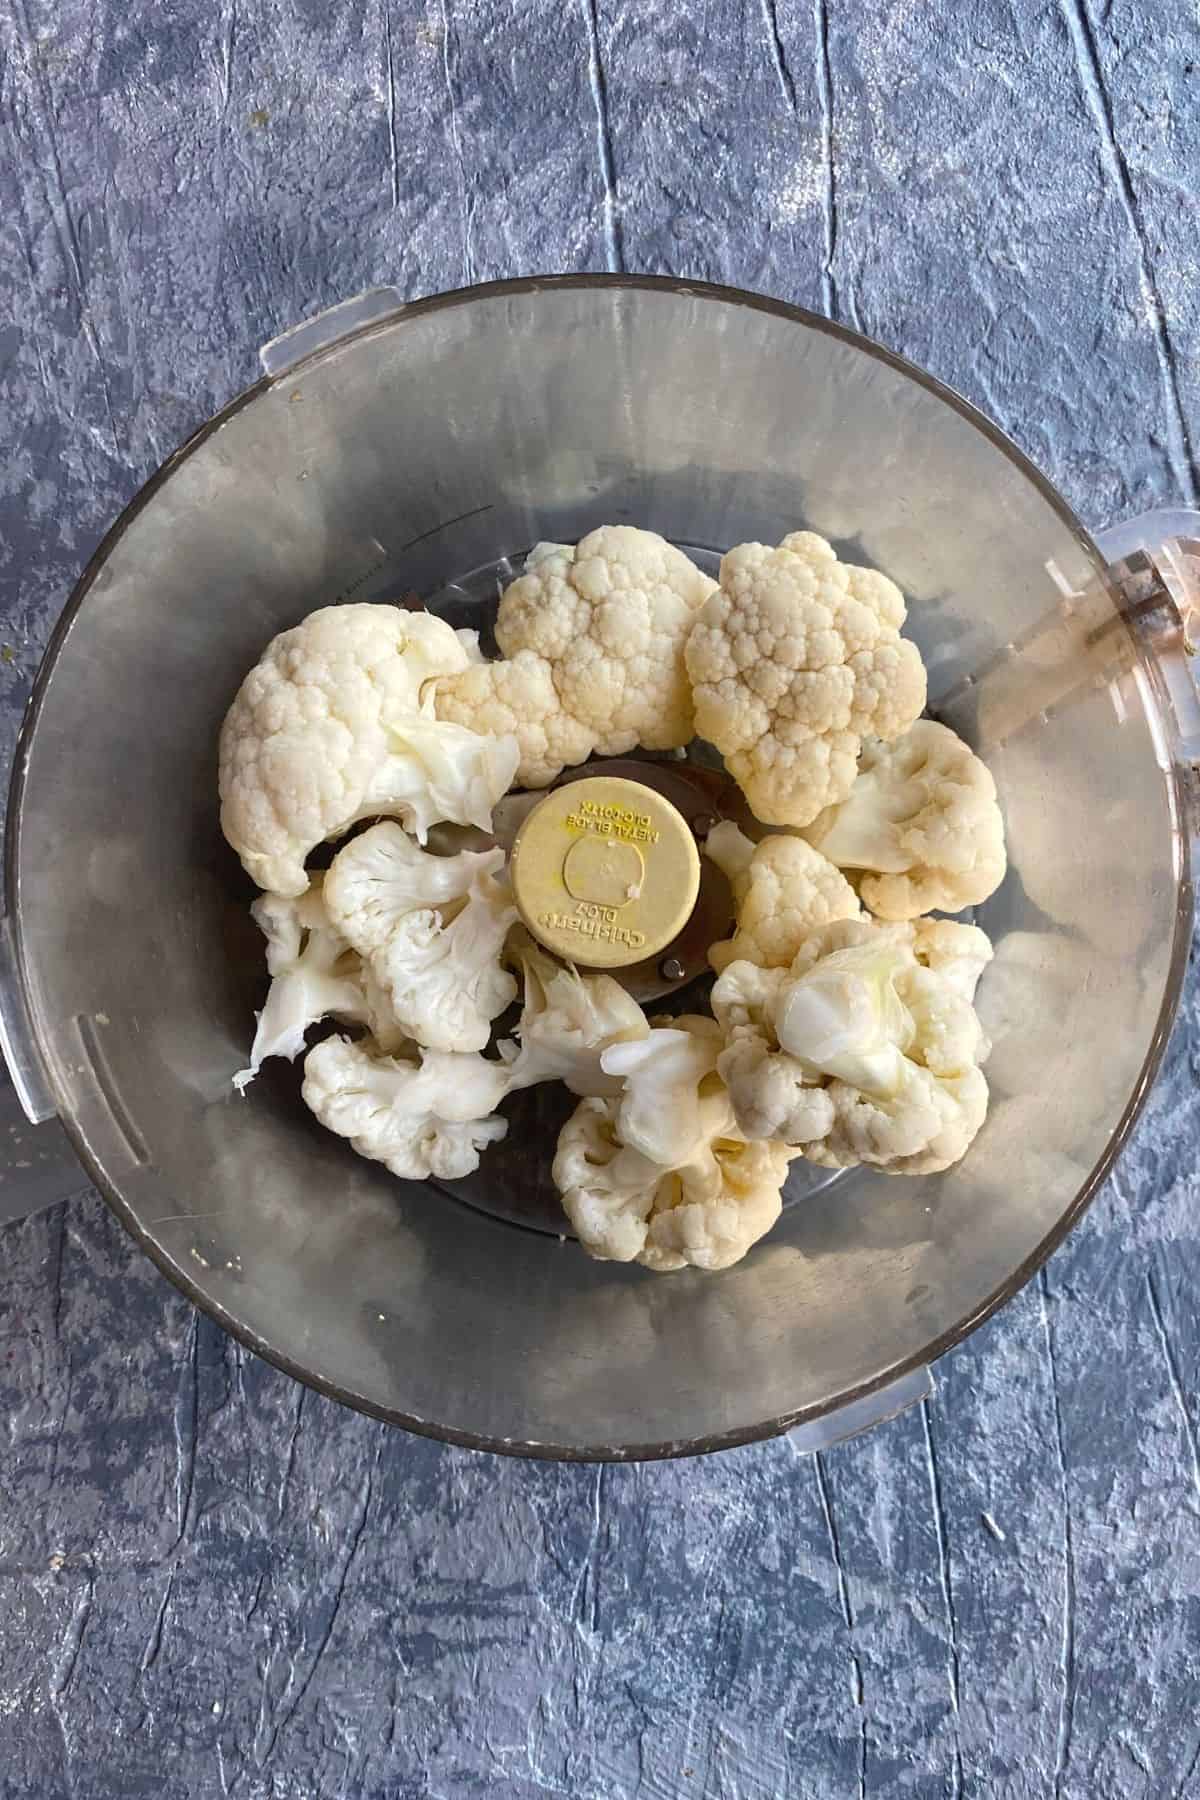 Pieces of cauliflower in a food processor